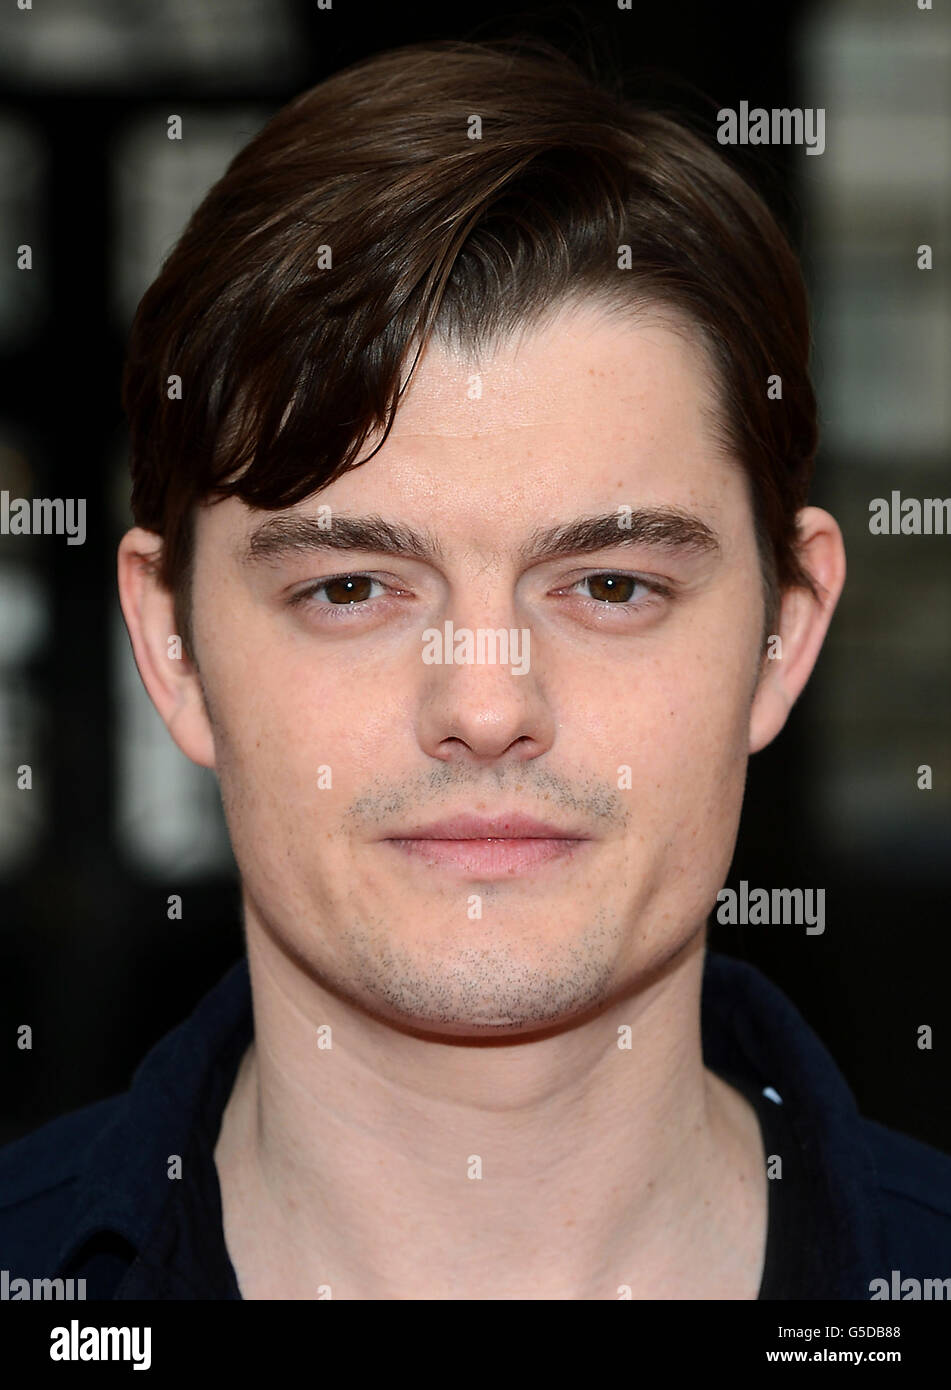 Sam Riley attends the Premier of On The Road, film adaptation of Jack Kerouac's novel at Somerset House, London Stock Photo